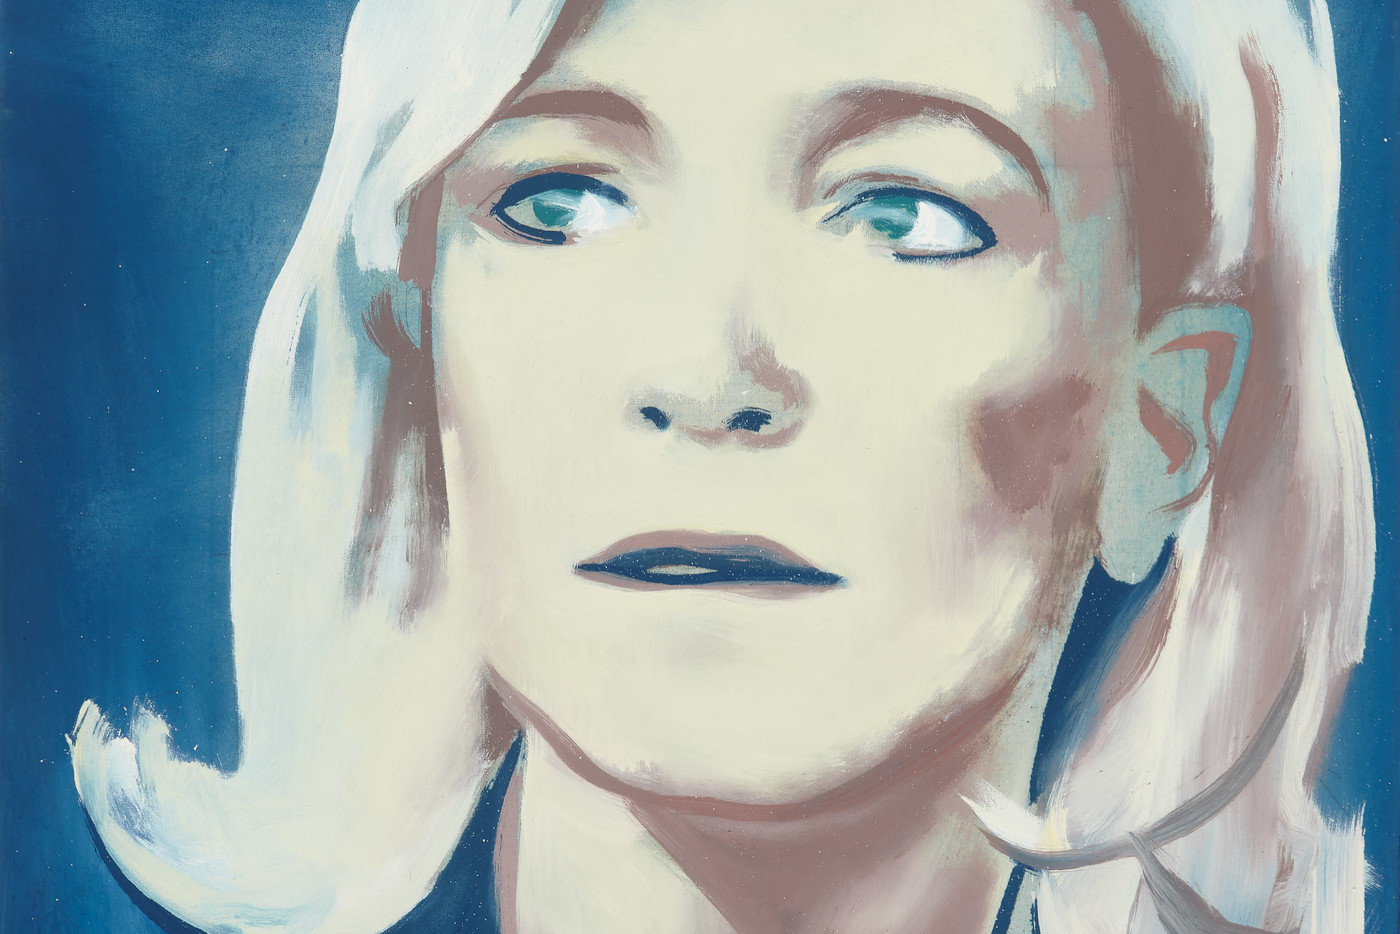 Marine Le Pen (2012) by Wilhelm Sasnal. All images courtesy of the artist and Anton Kern gallery